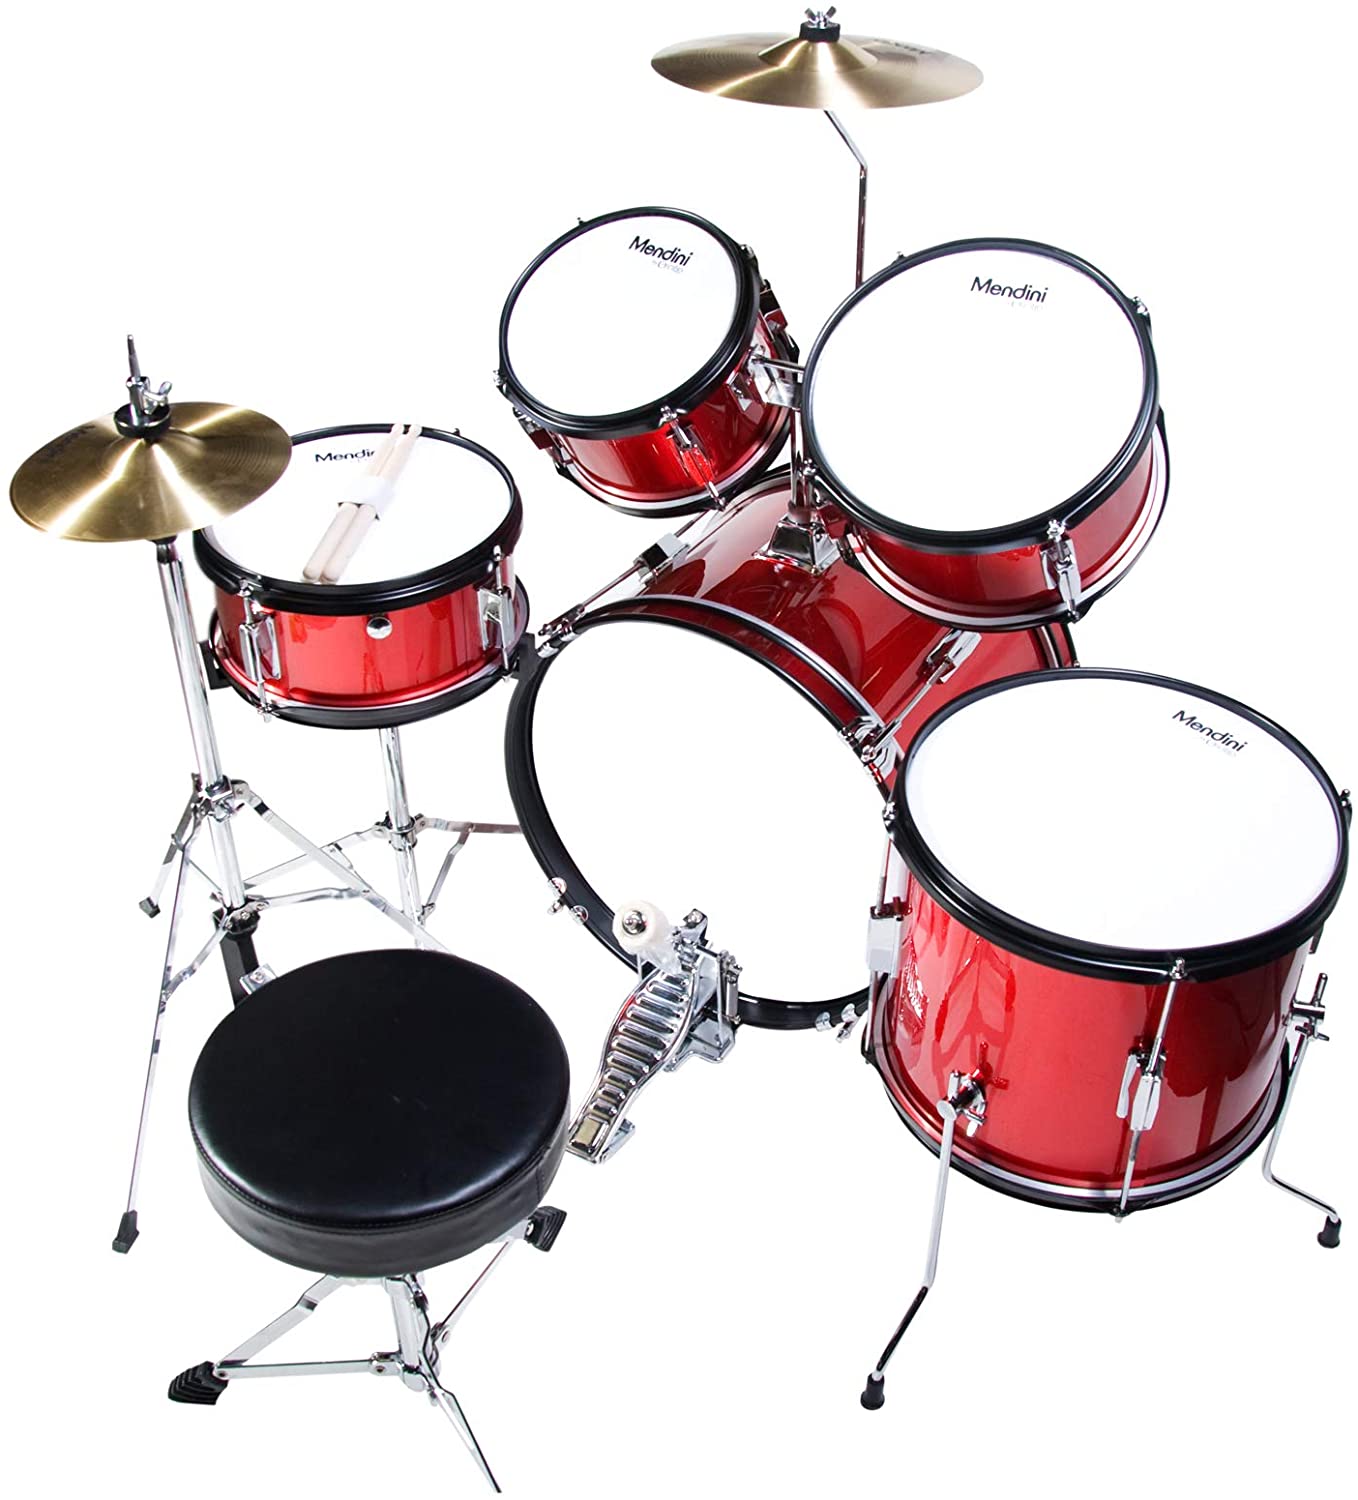 MJDS-5-BR Metallic Bright Red Cymbal Pedal & Drumsticks Mendini by Cecilio 16 inch 5-Piece Complete Kids / Junior Drum Set with Adjustable Throne 